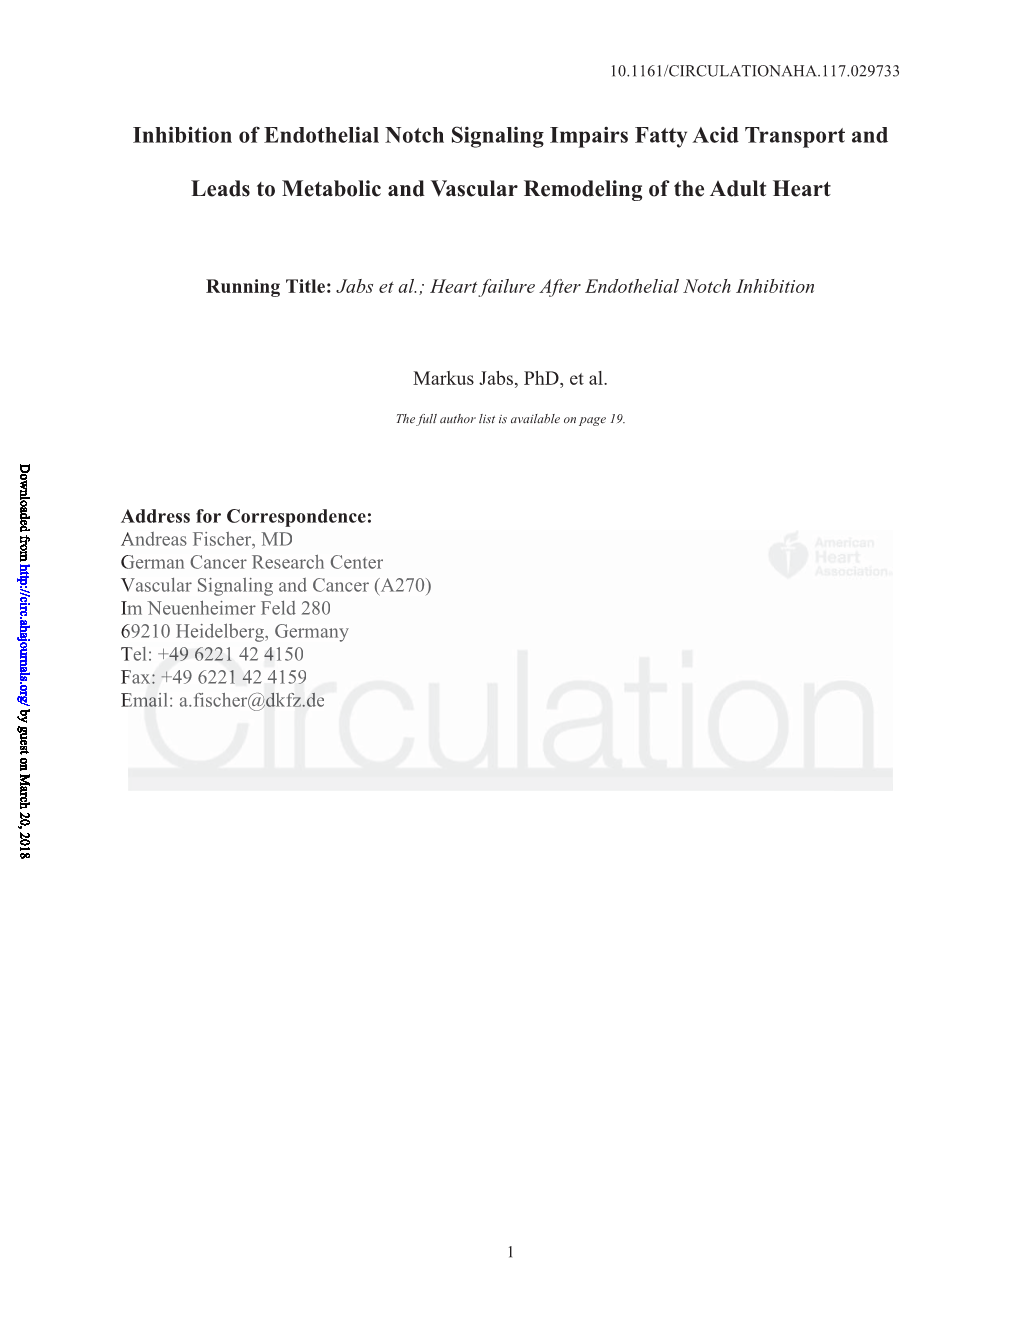 Inhibition of Endothelial Notch Signaling Impairs Fatty Acid Transport and Leads to Metabolic and Vascular Remodeling of the Adult Heart Markus Jabs, Adam J